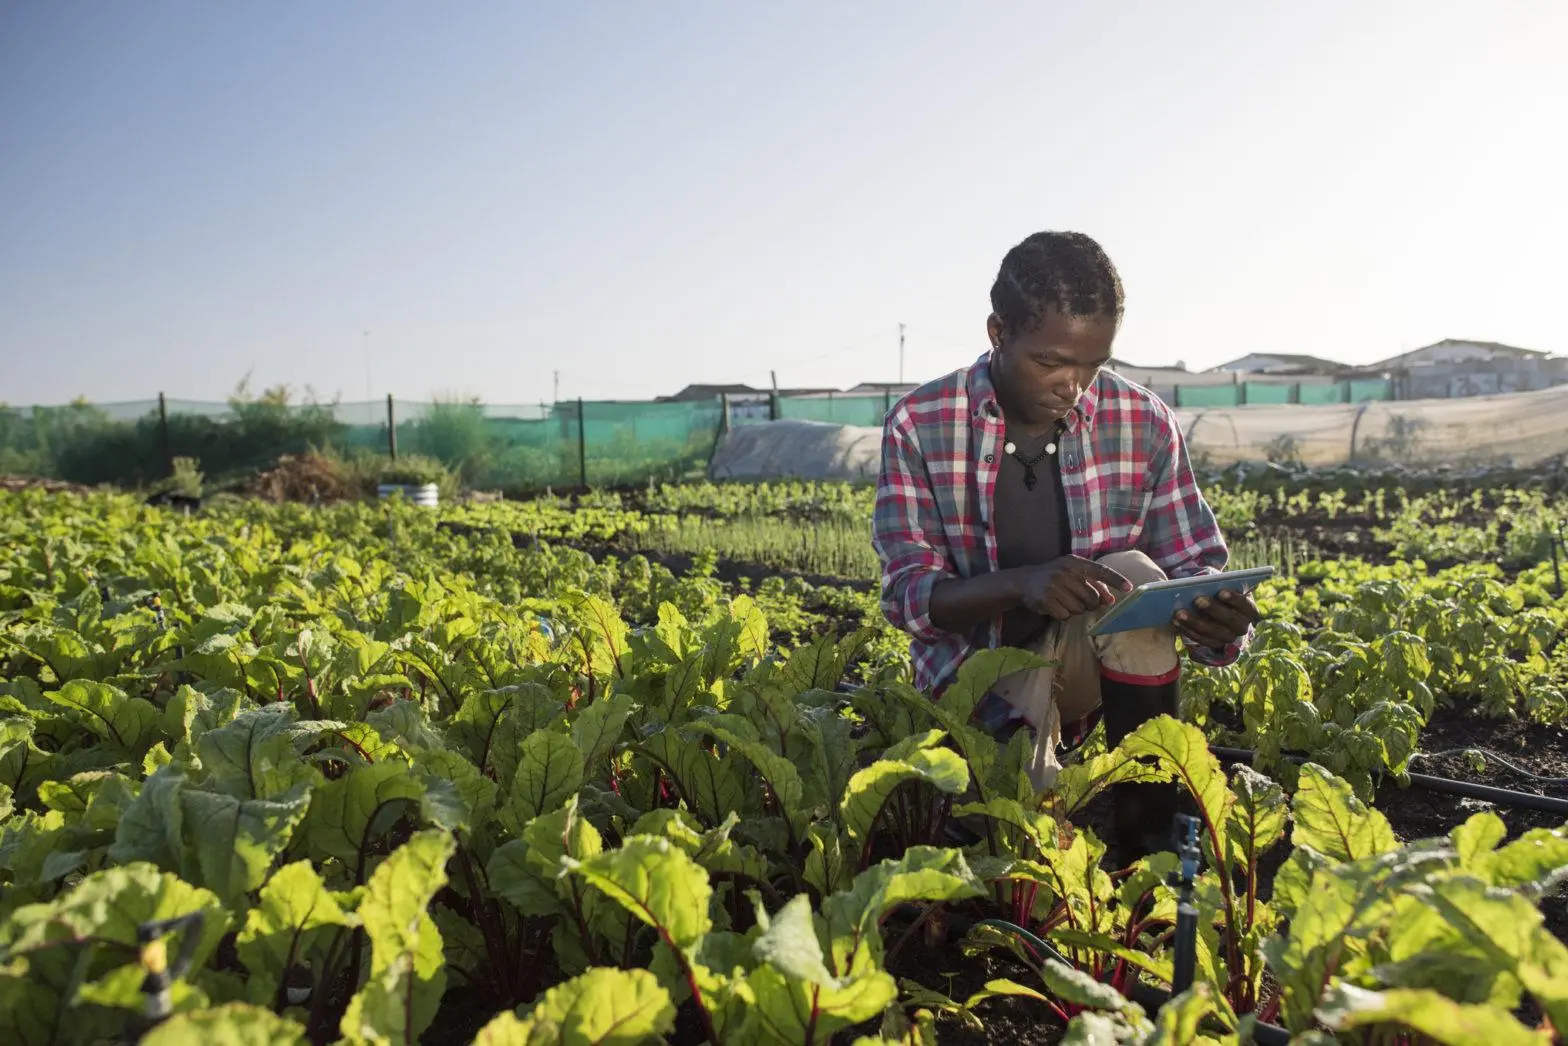 Africa's agritech potential